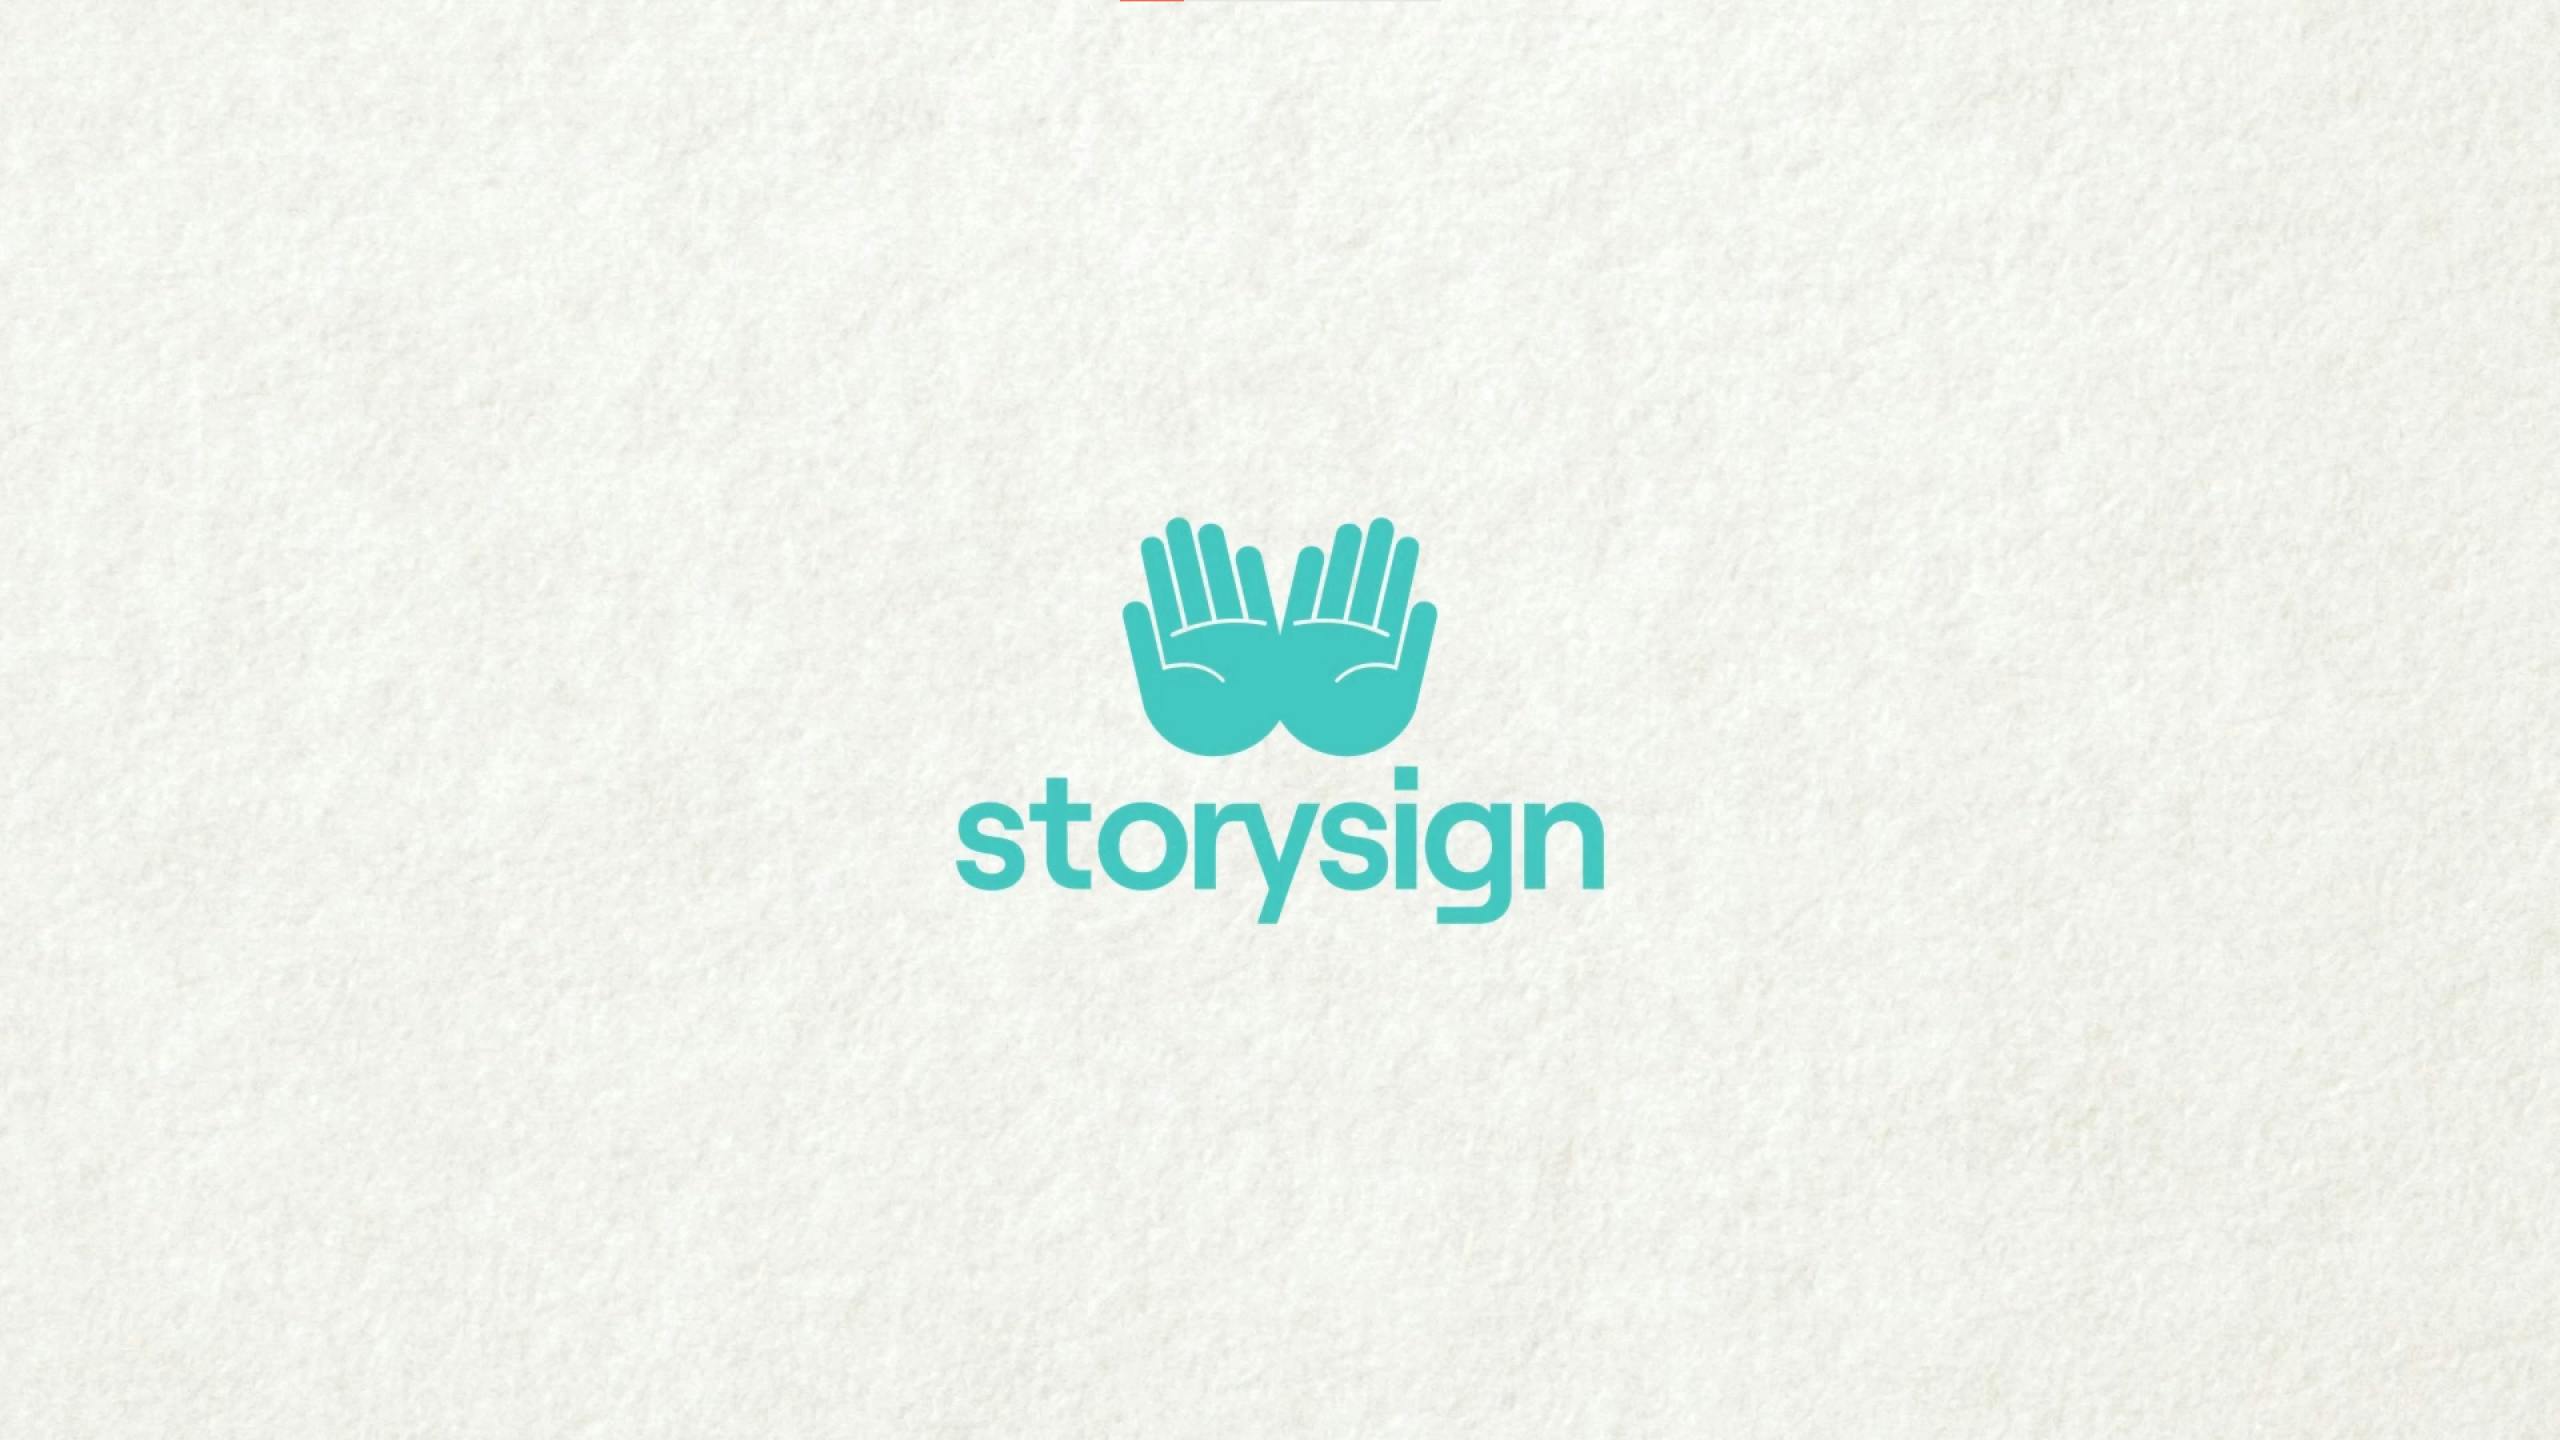 Storysign logo : two blues hands